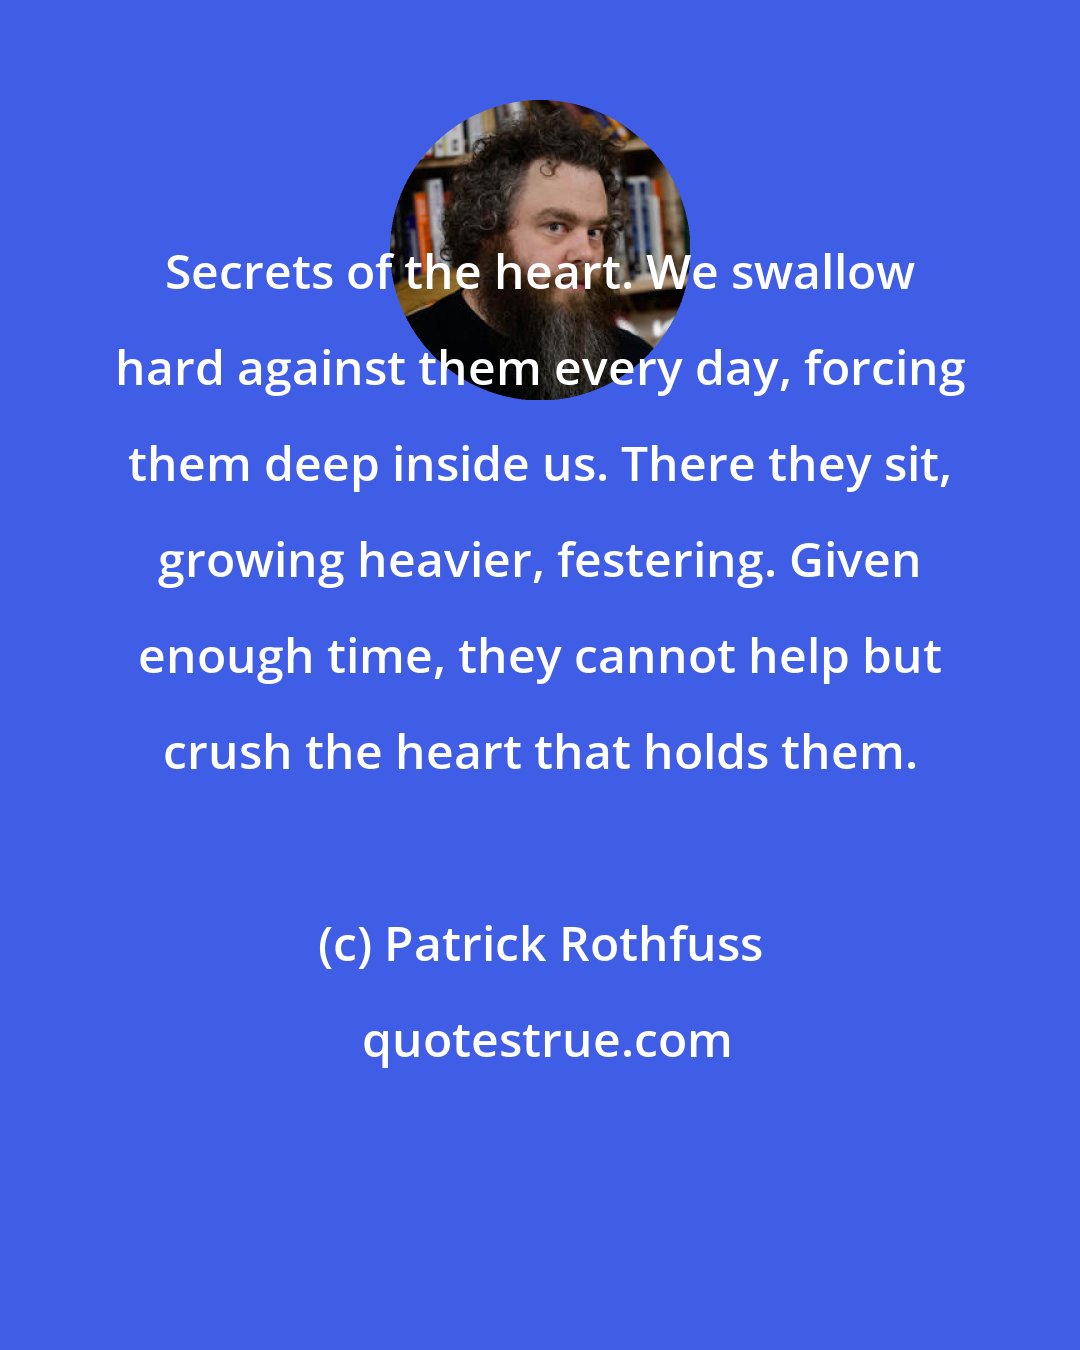 Patrick Rothfuss: Secrets of the heart. We swallow hard against them every day, forcing them deep inside us. There they sit, growing heavier, festering. Given enough time, they cannot help but crush the heart that holds them.